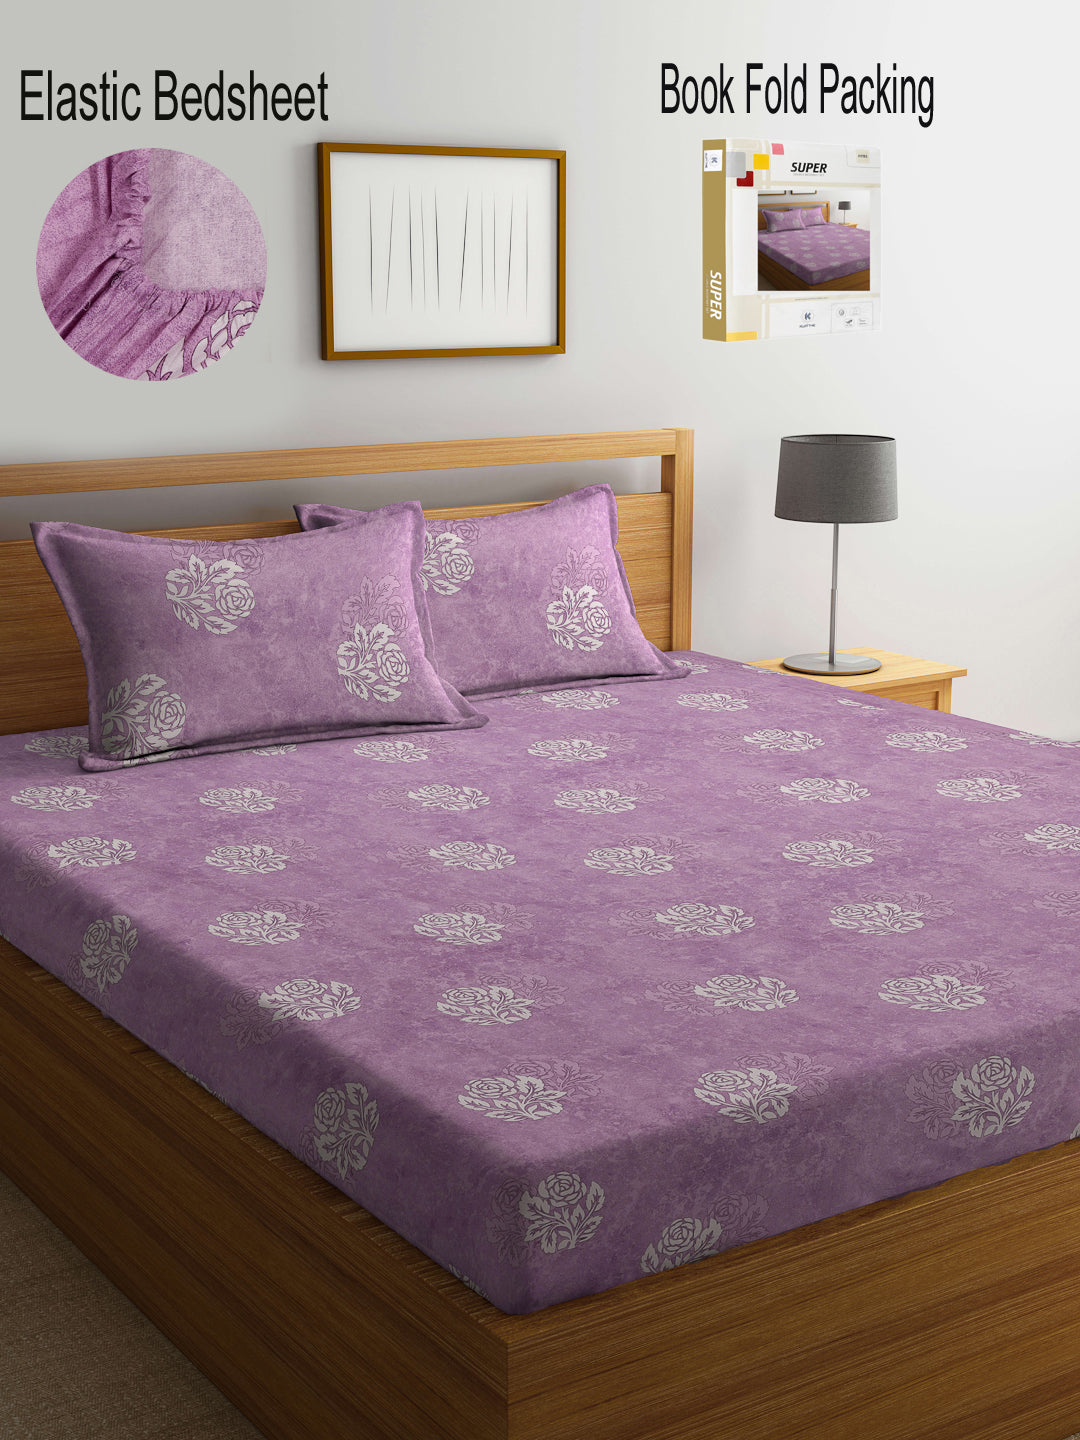 Klotthe Purple Floral 400 TC Pure Cotton Fitted Double Bedsheet Set in Book Fold Packing